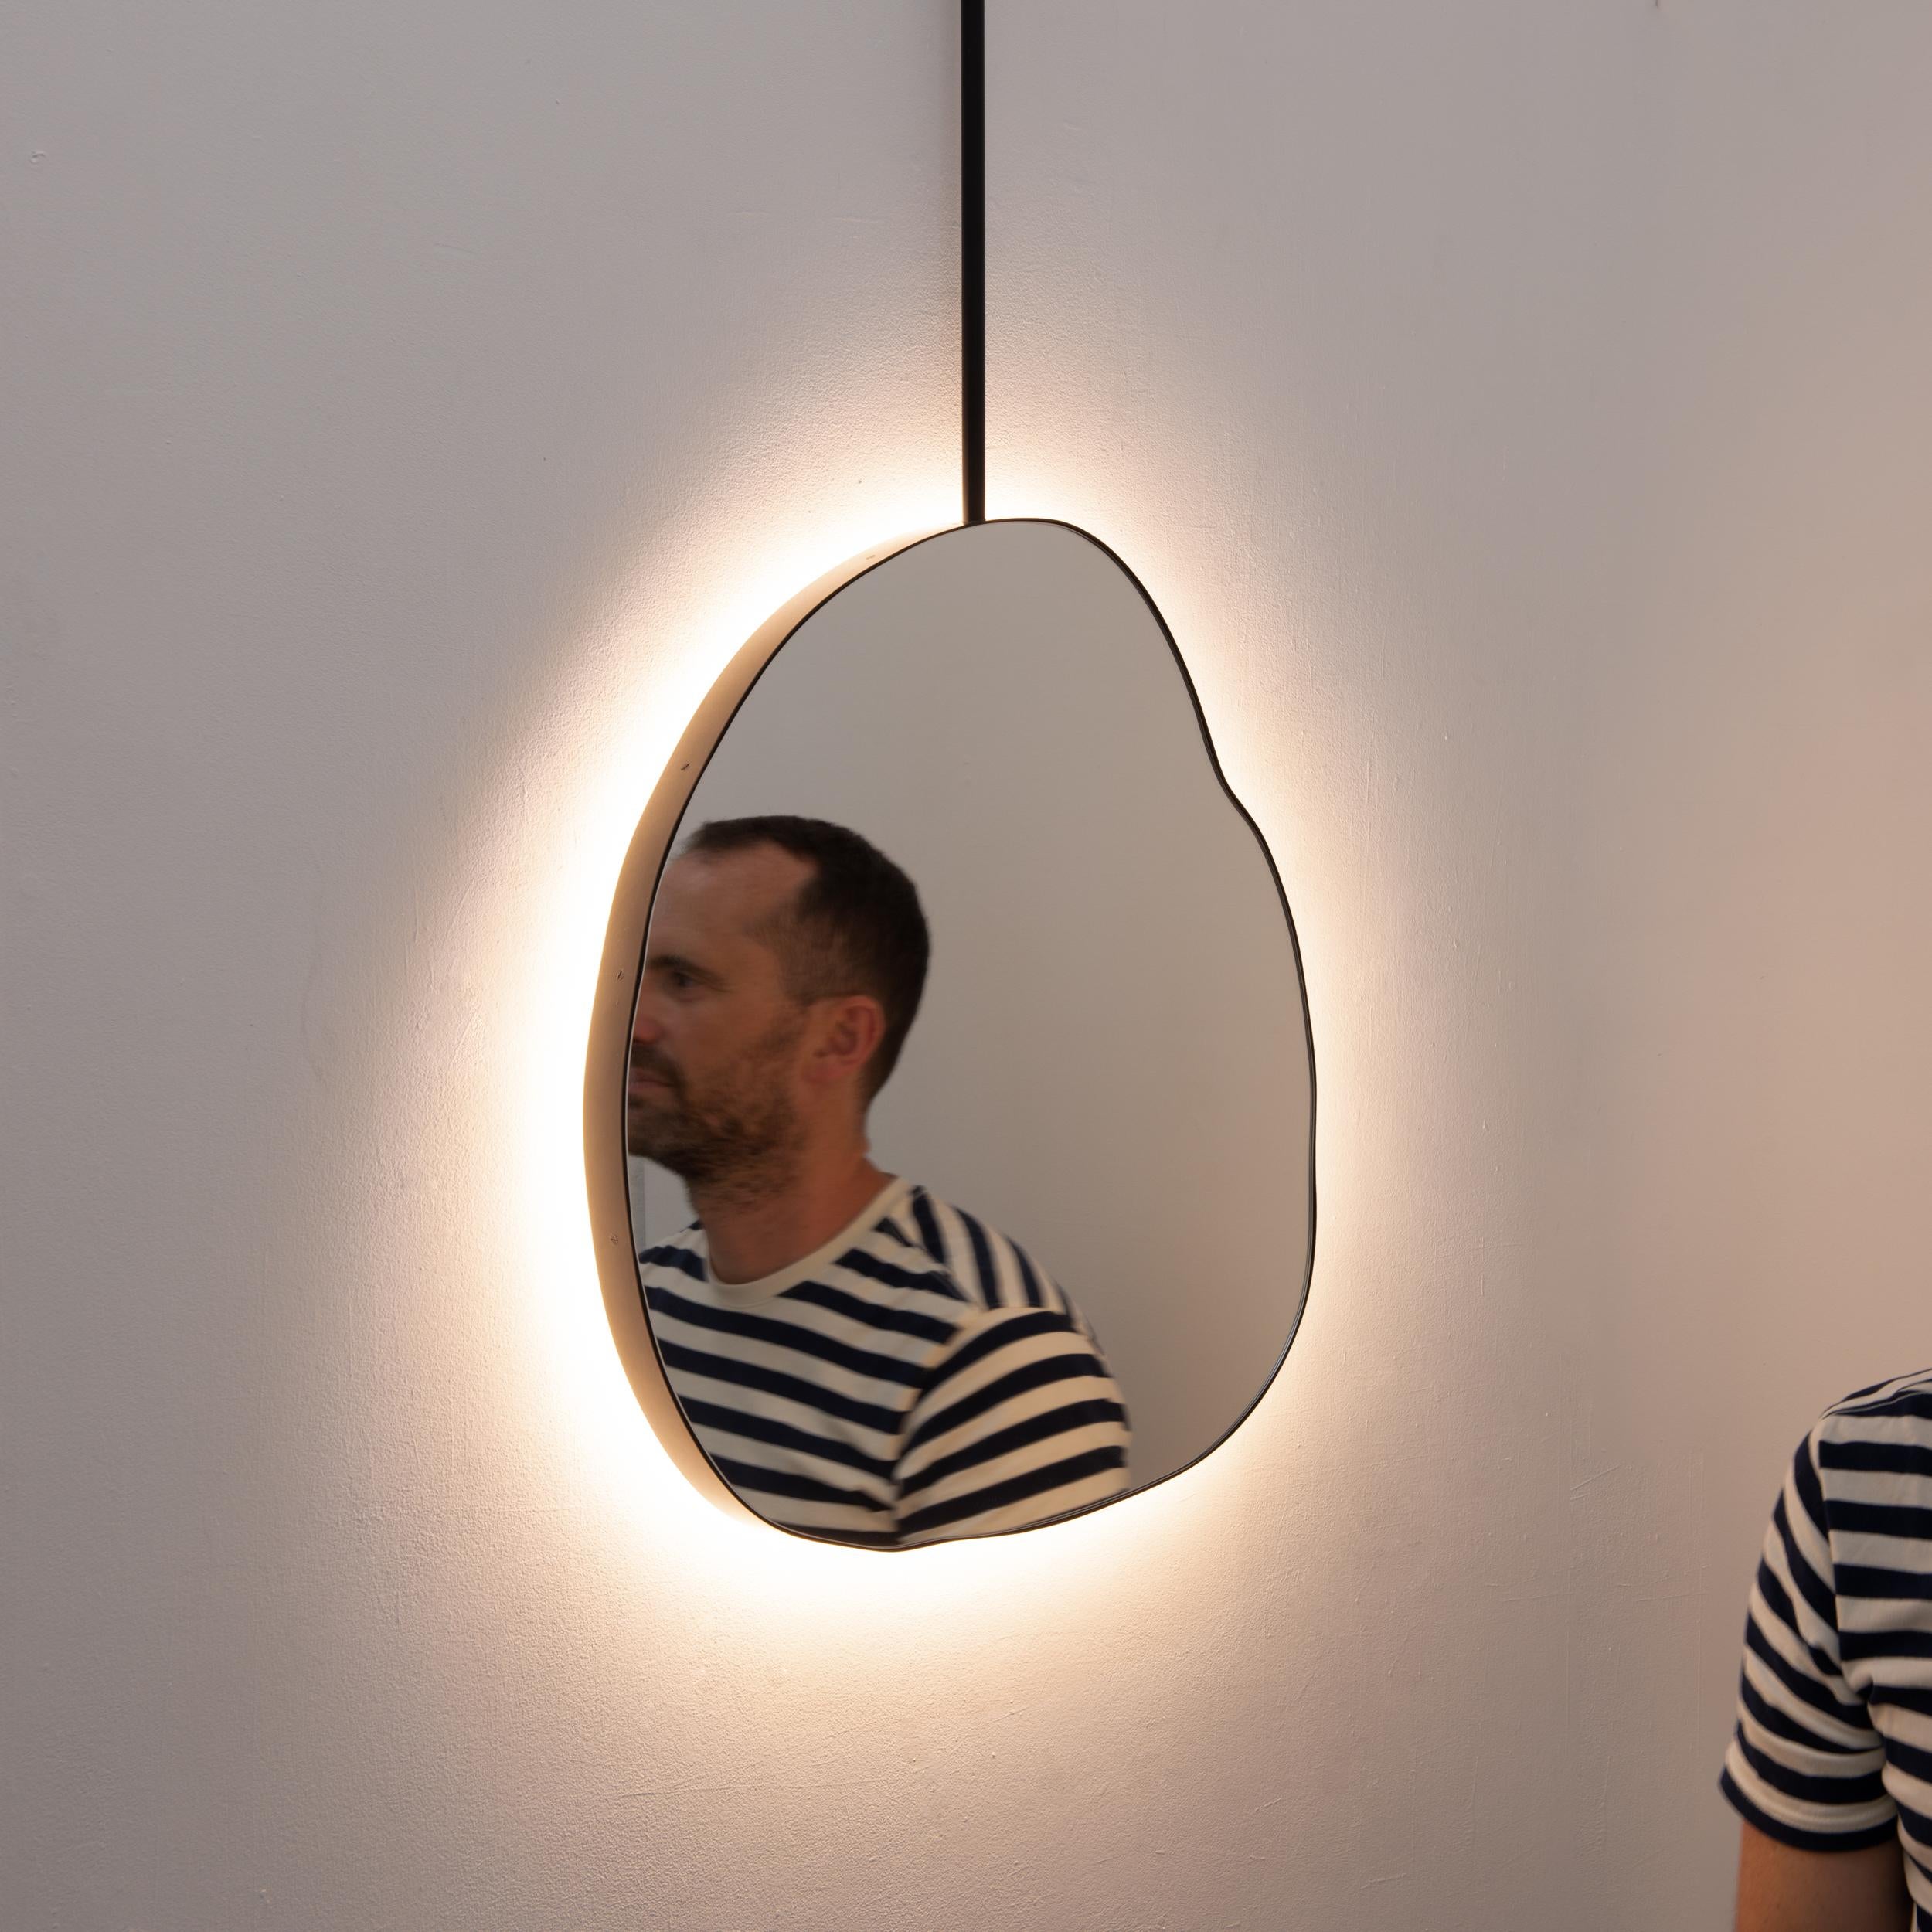 Original and unique organic shaped Ergon™ suspended mirror with a modern matte black frame. The back-illumination creates a beautiful mood light when installed in front of a wall.

Designed and handcrafted in London, UK, our unique and elegant